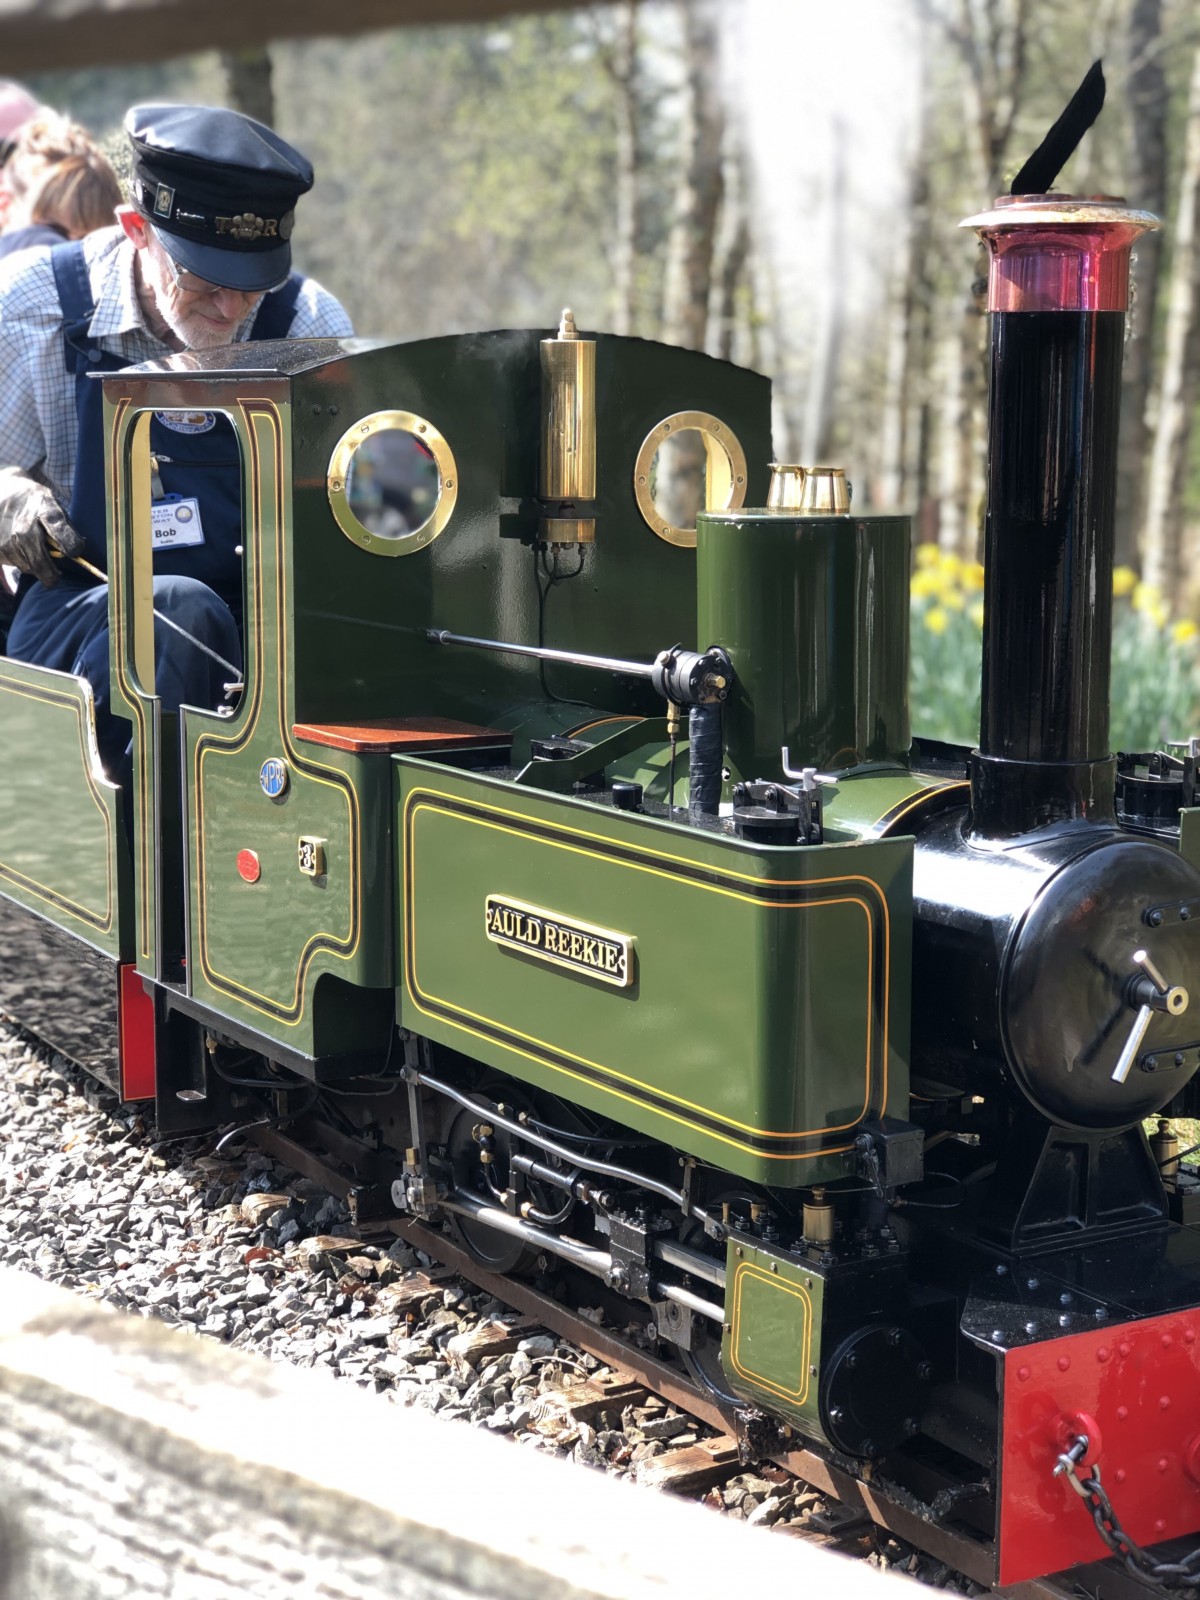 Wester Pickston Railway just outside Methven in Perth is home to The Scottish Model Engineering Trust